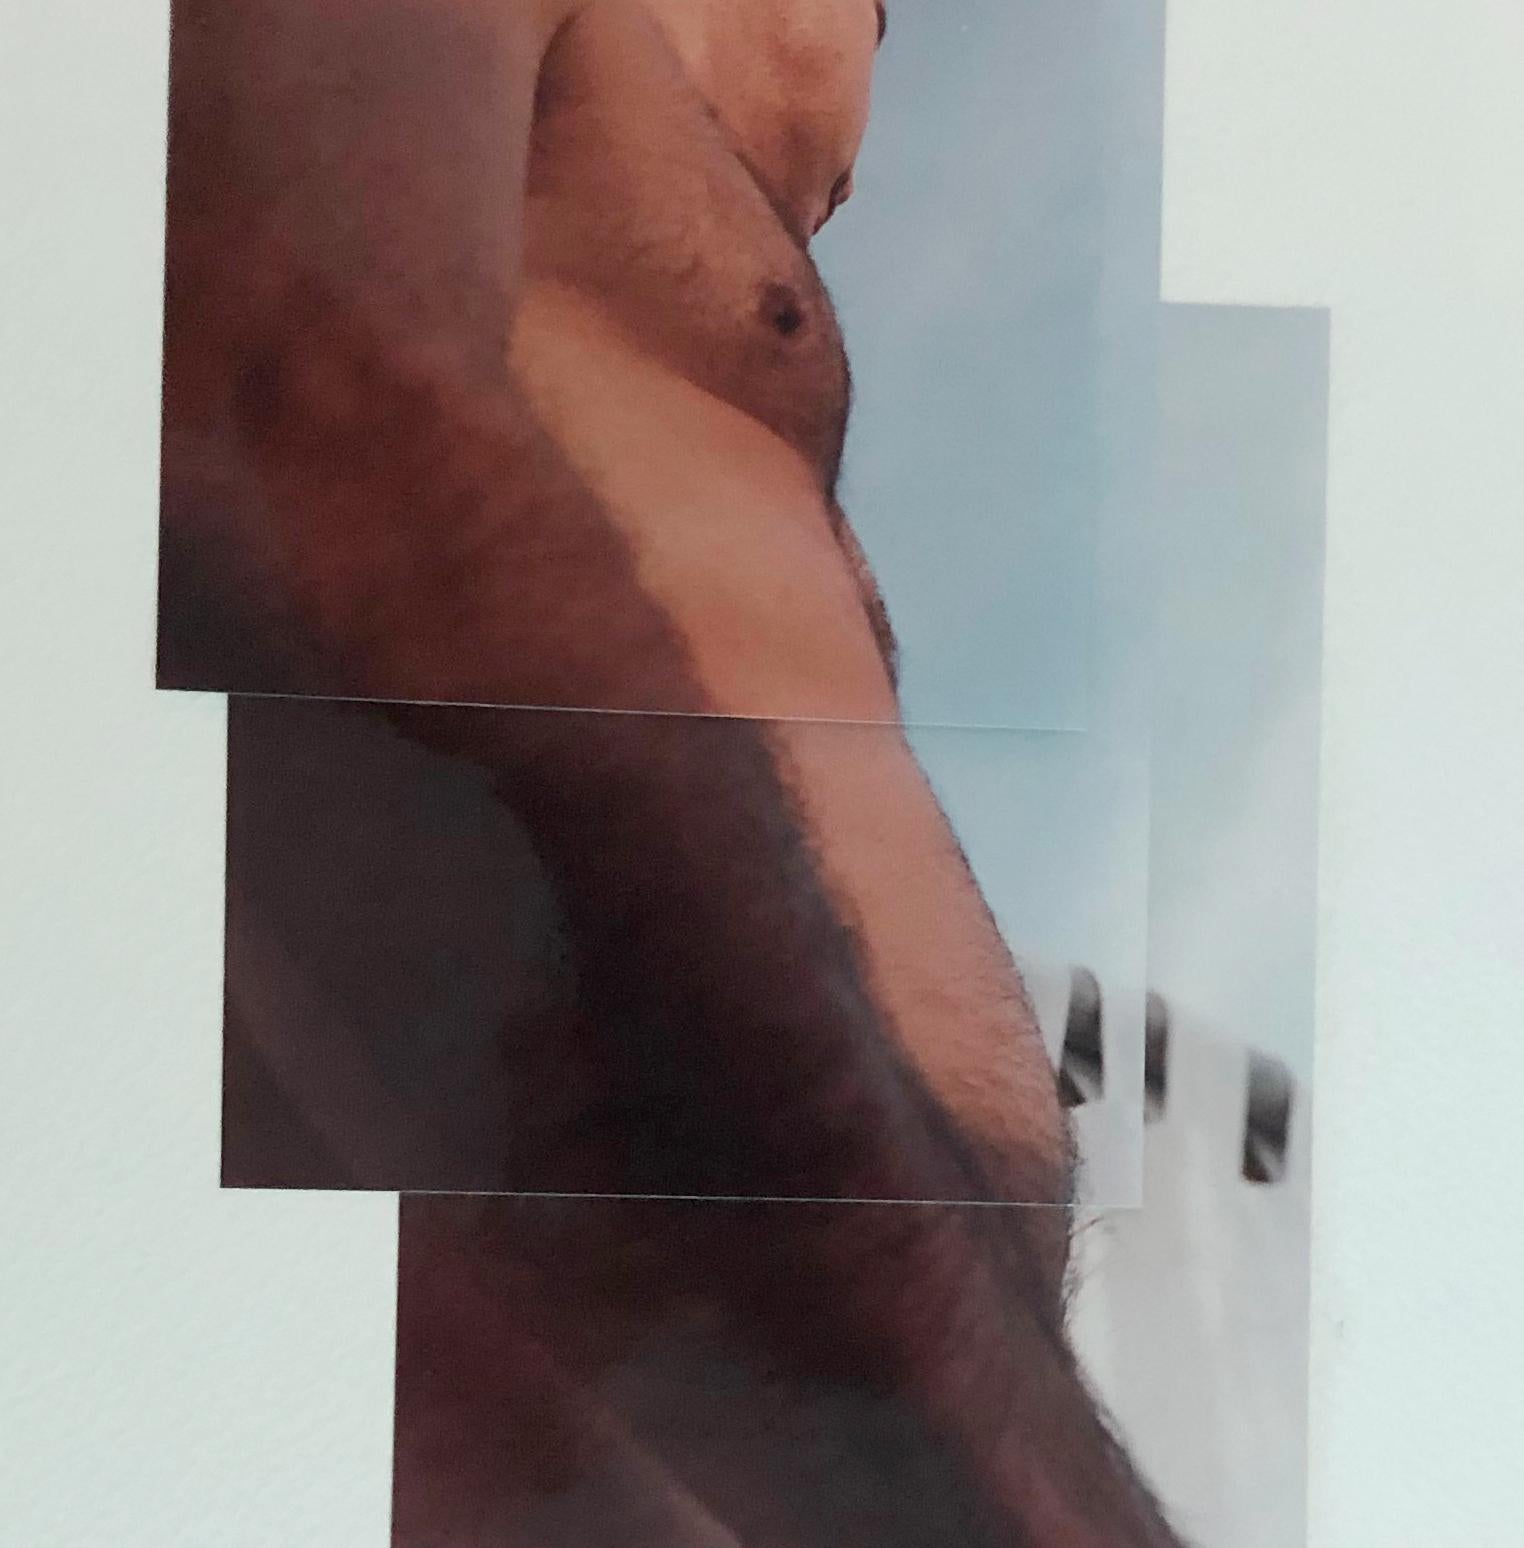 Bill, 2002 by Celso José Castro Daza
From the Identidad series
One-of-a-kind Photo collage
Sheet Size: 27 in. H x 20 in. W
Unframed

The root of these unique photographic works by the artist Celso Castro occurred when the artist returned from Italy